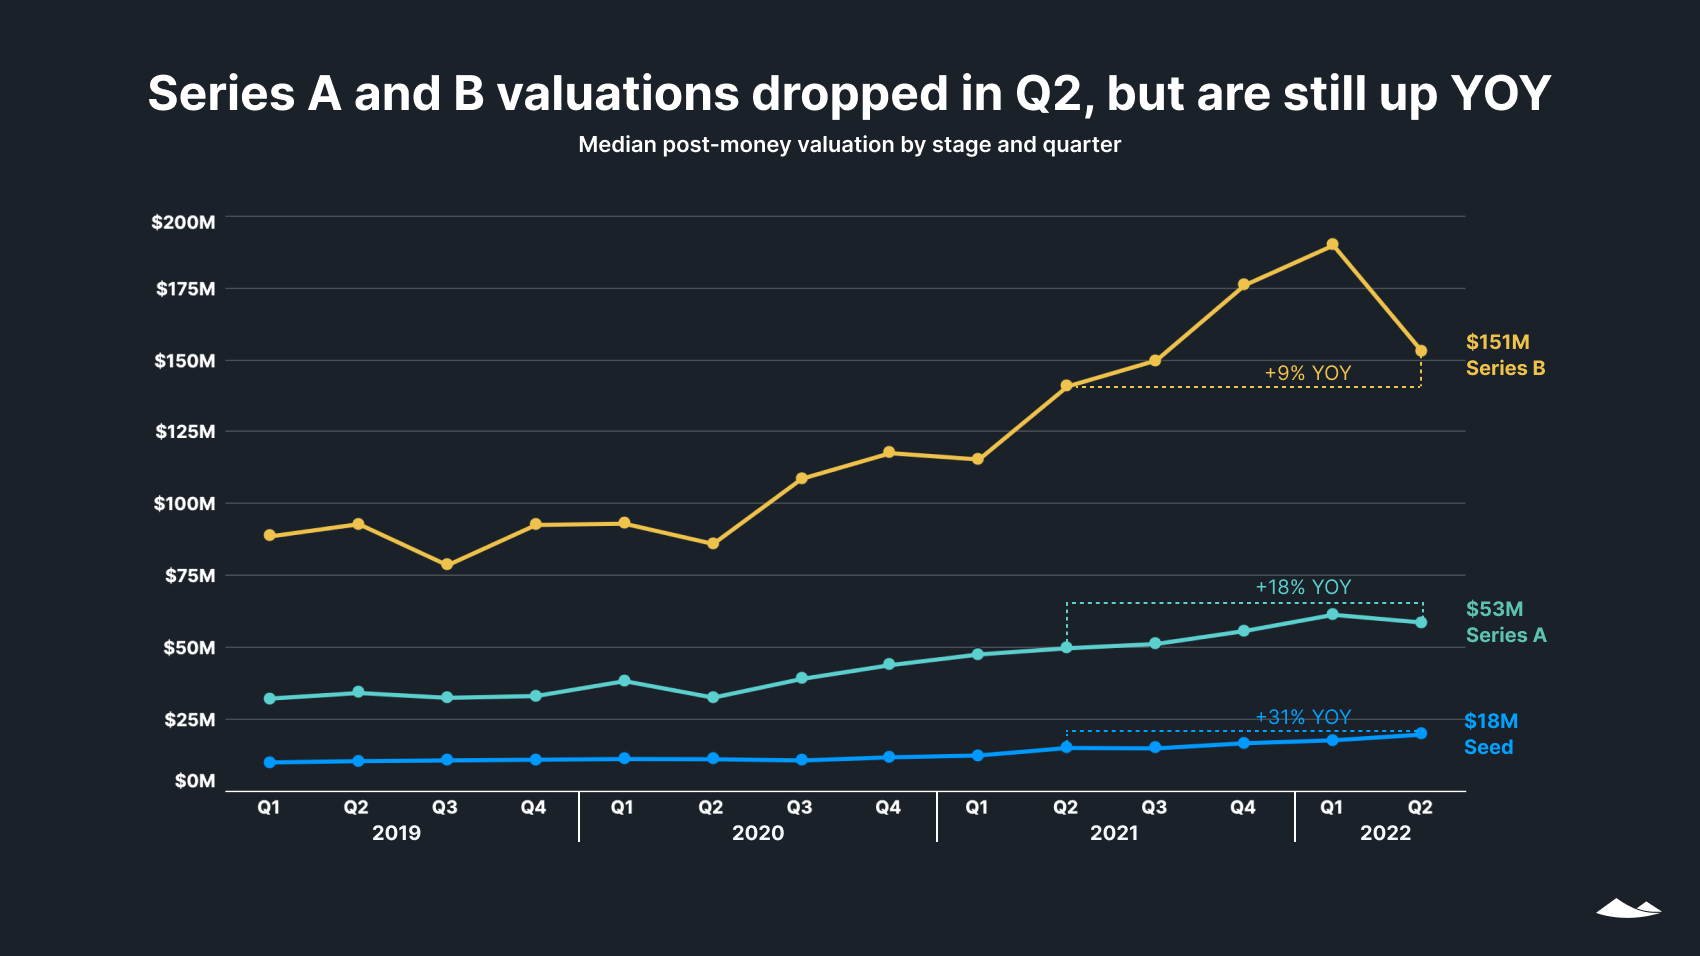 Series A and B valuations dropped in Q2, but are still up YOY: Median post-money valuation by stage and quarter. Line chart